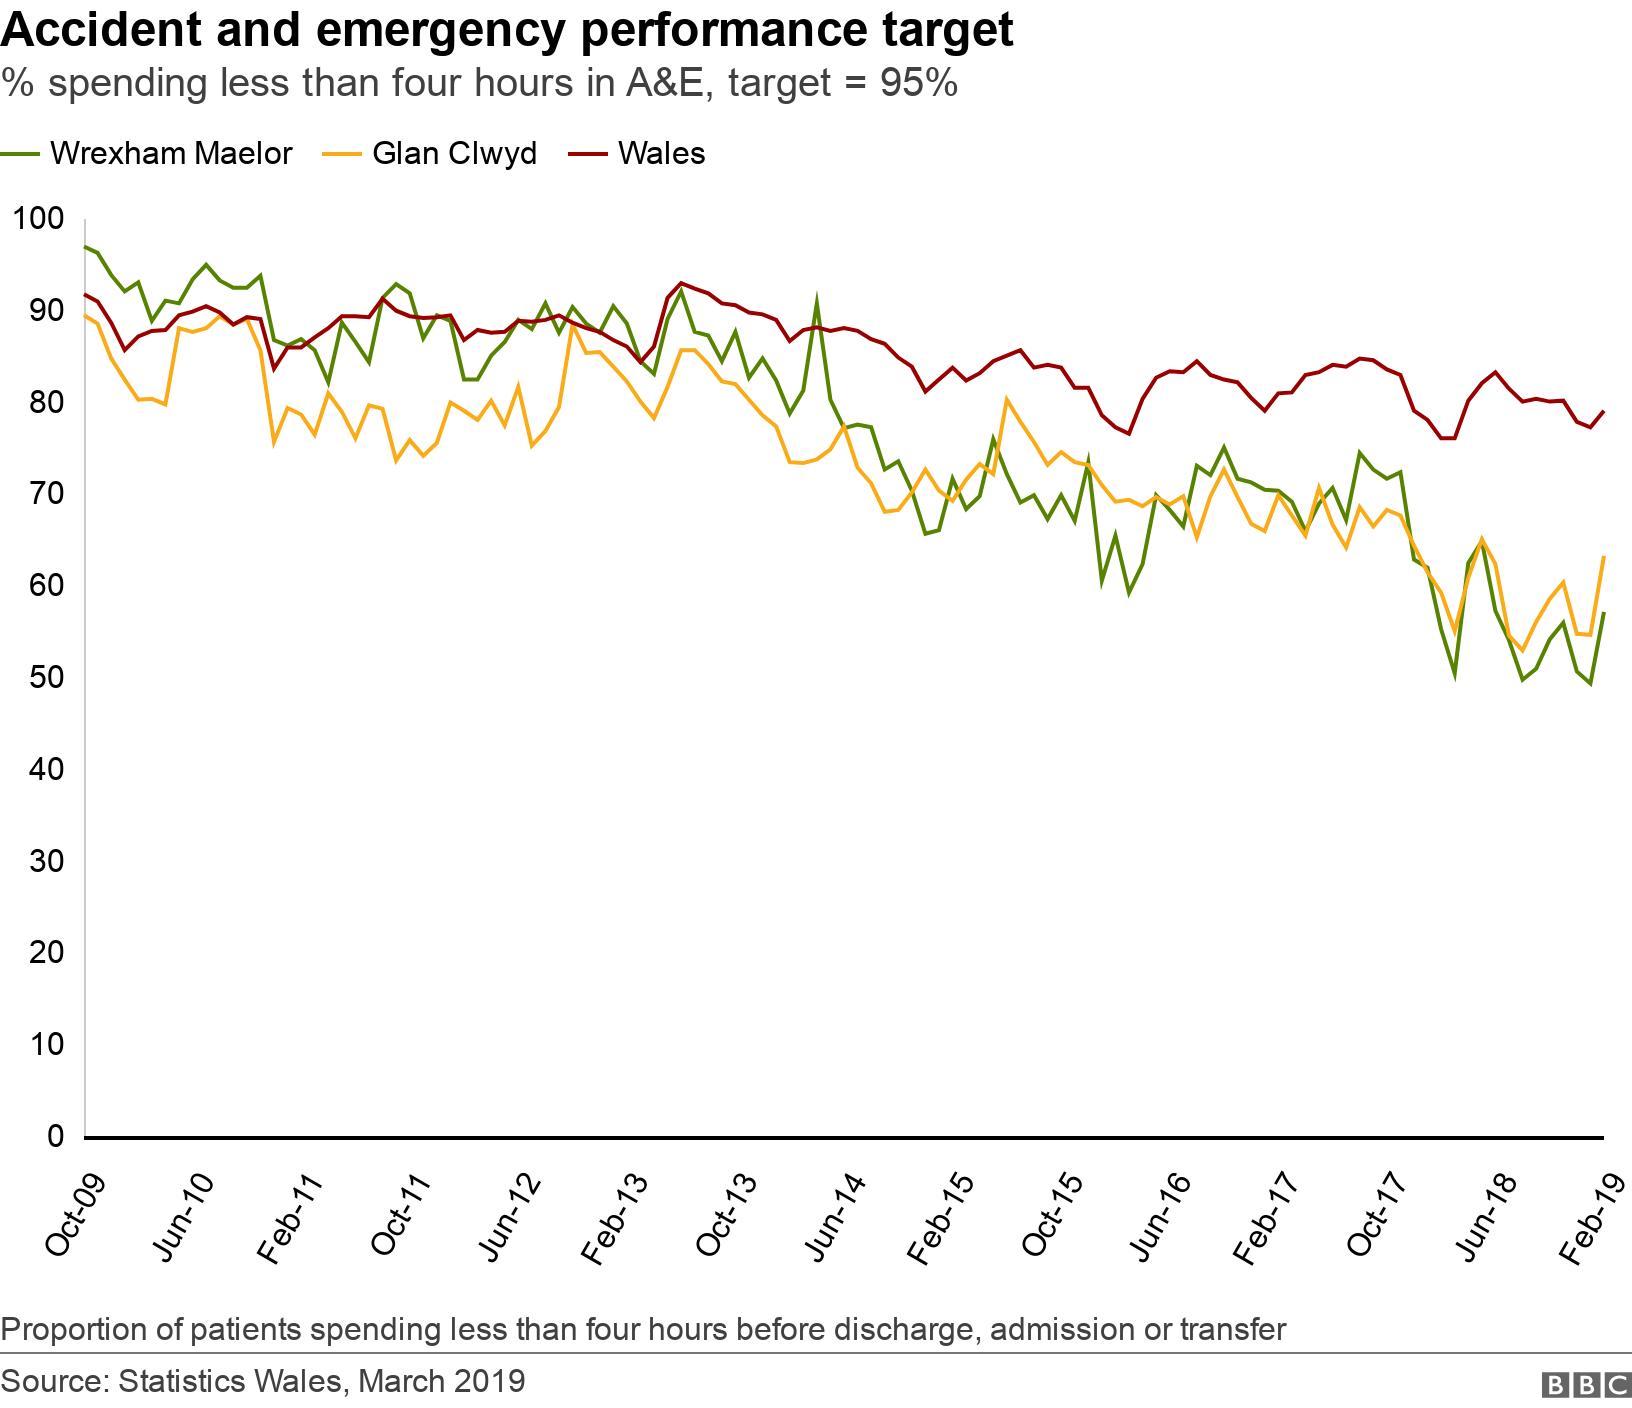 Accident and emergency performance target. % spending less than four hours in A&E, target = 95%.  Proportion of patients spending less than four hours before discharge, admission or transfer.